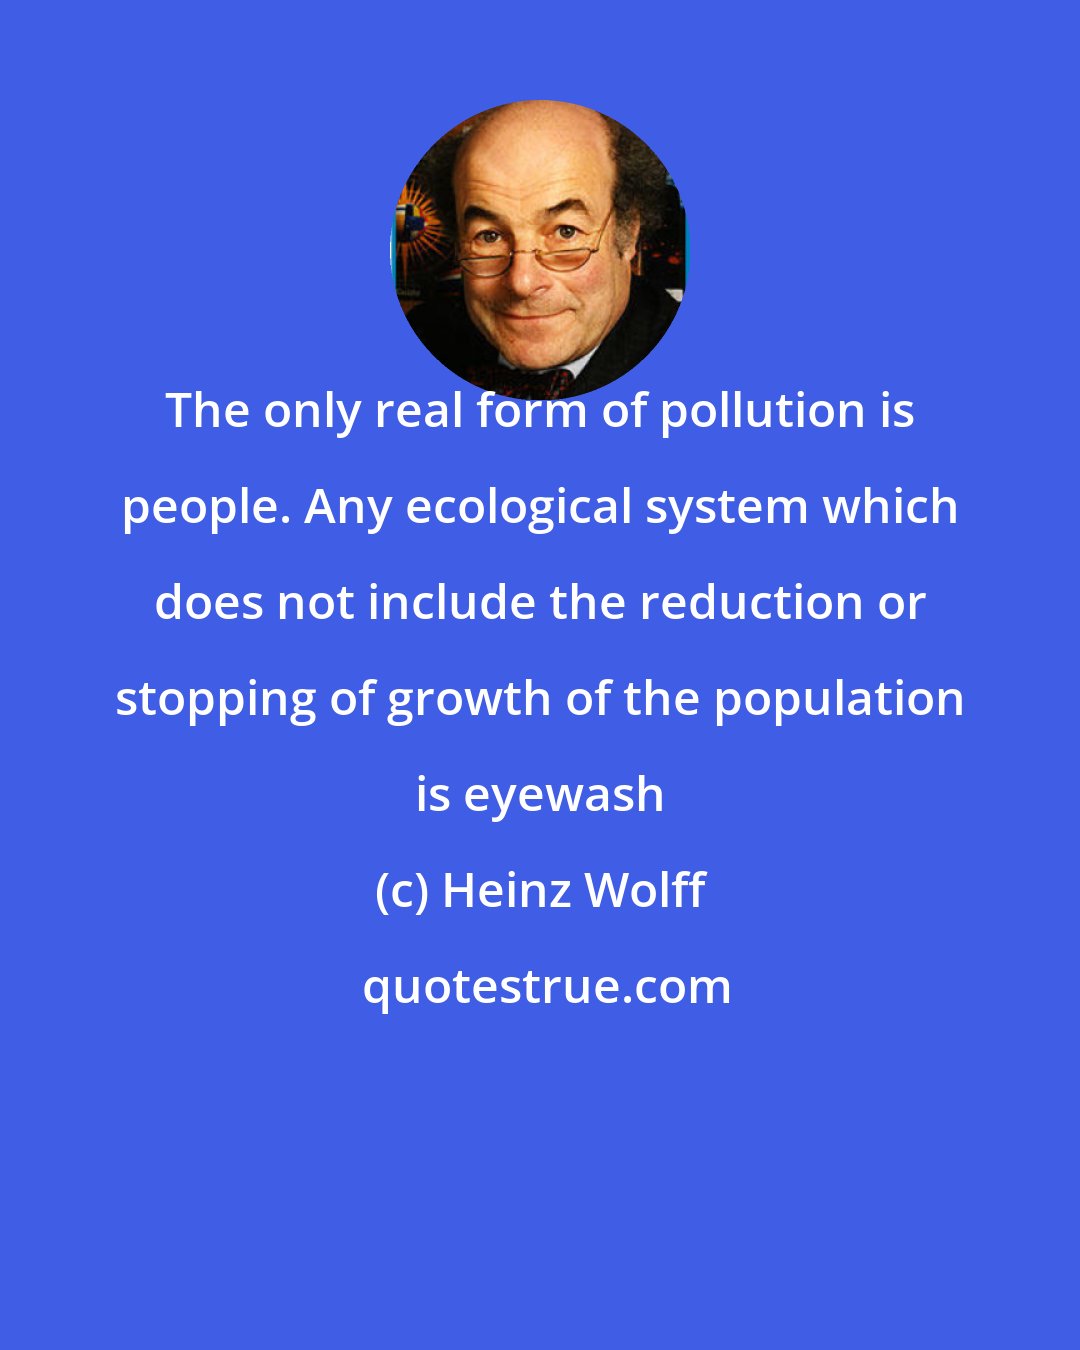 Heinz Wolff: The only real form of pollution is people. Any ecological system which does not include the reduction or stopping of growth of the population is eyewash